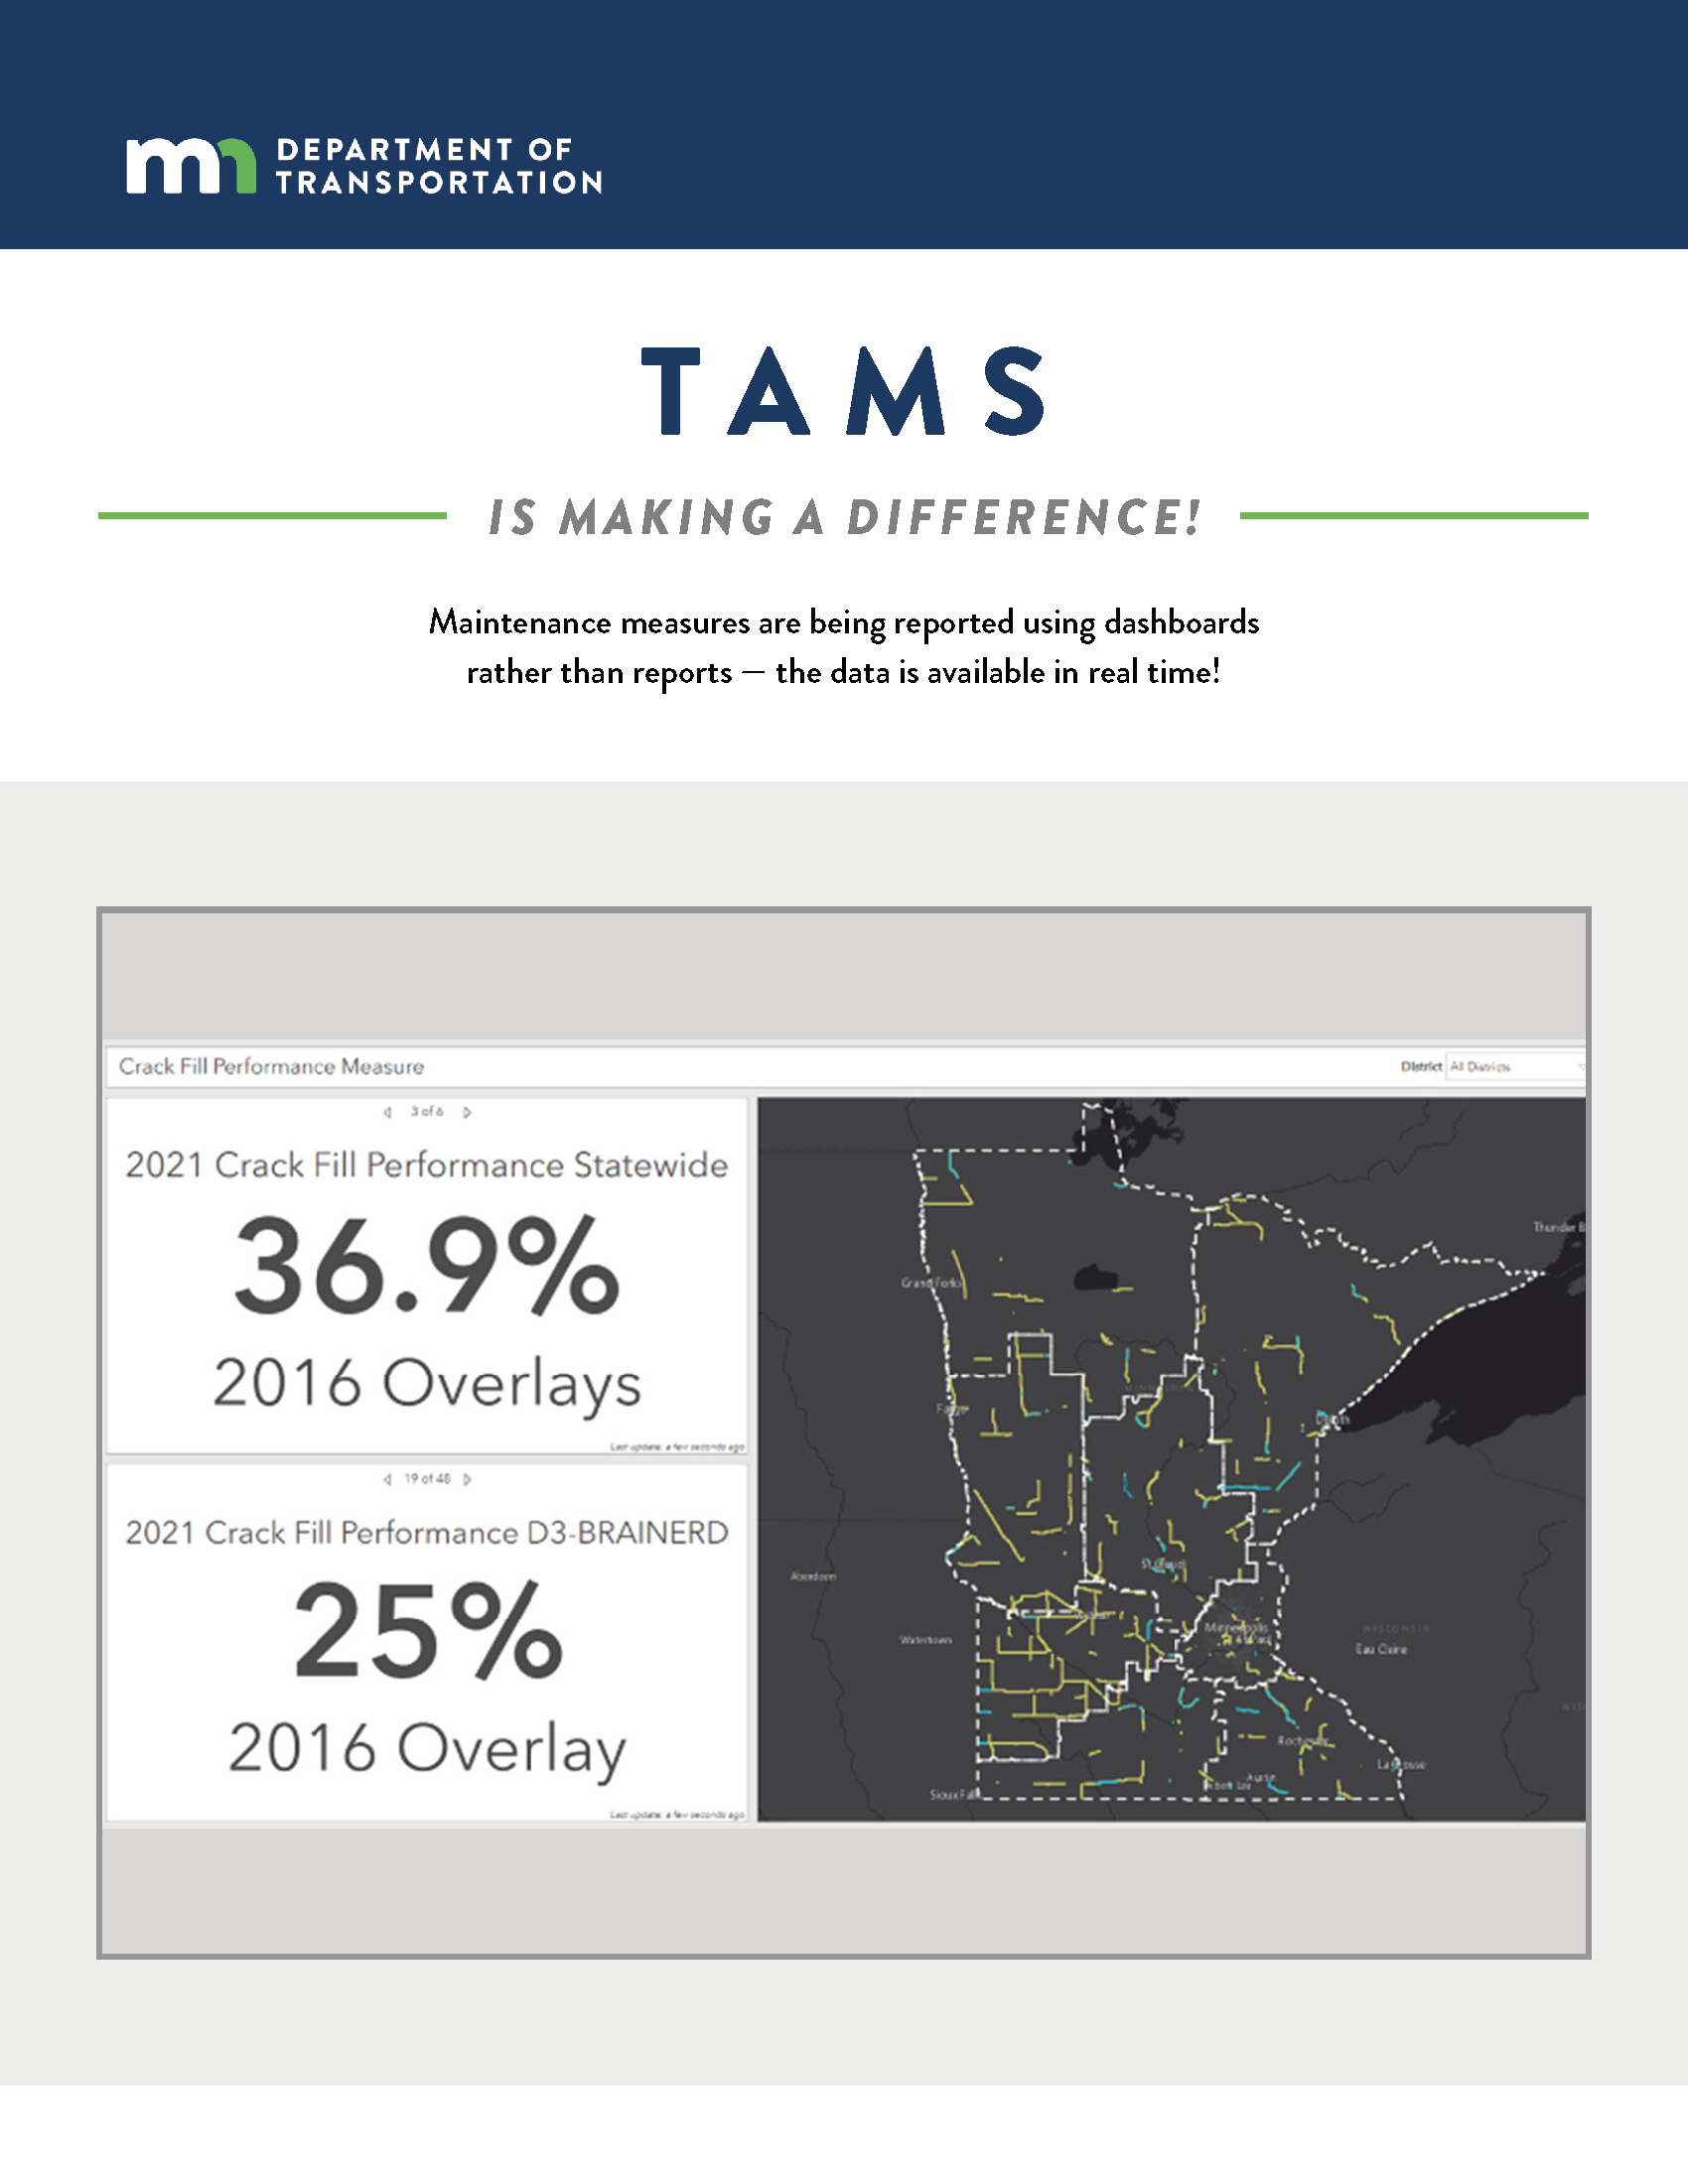 TAMS Difference - Dashboards (flyer)